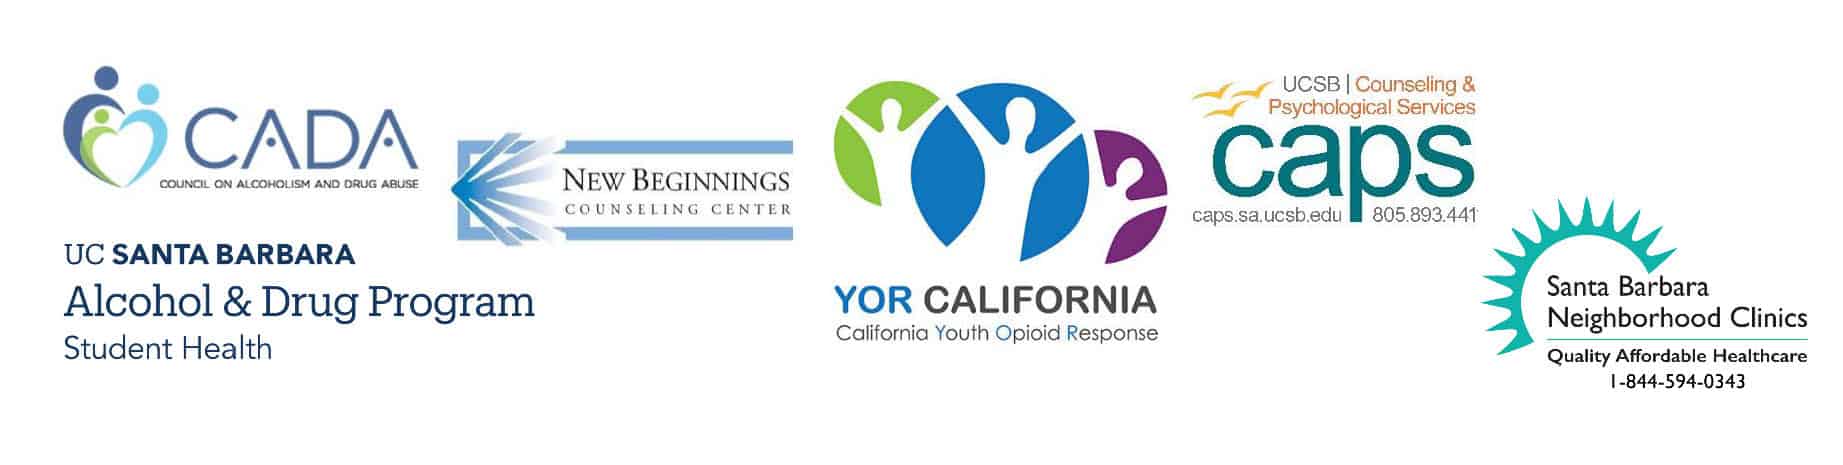 Logos of New Beginnings Counseling Center,UCSB Alcohol and Drug Program, Santa Barbara Neighborhood Clinics, the Council on Alcoholism and Drug Abuse, UCSB Counseling and Psychological Services, and Youth Opioid Response Grant (YOR CALIFORNIA).